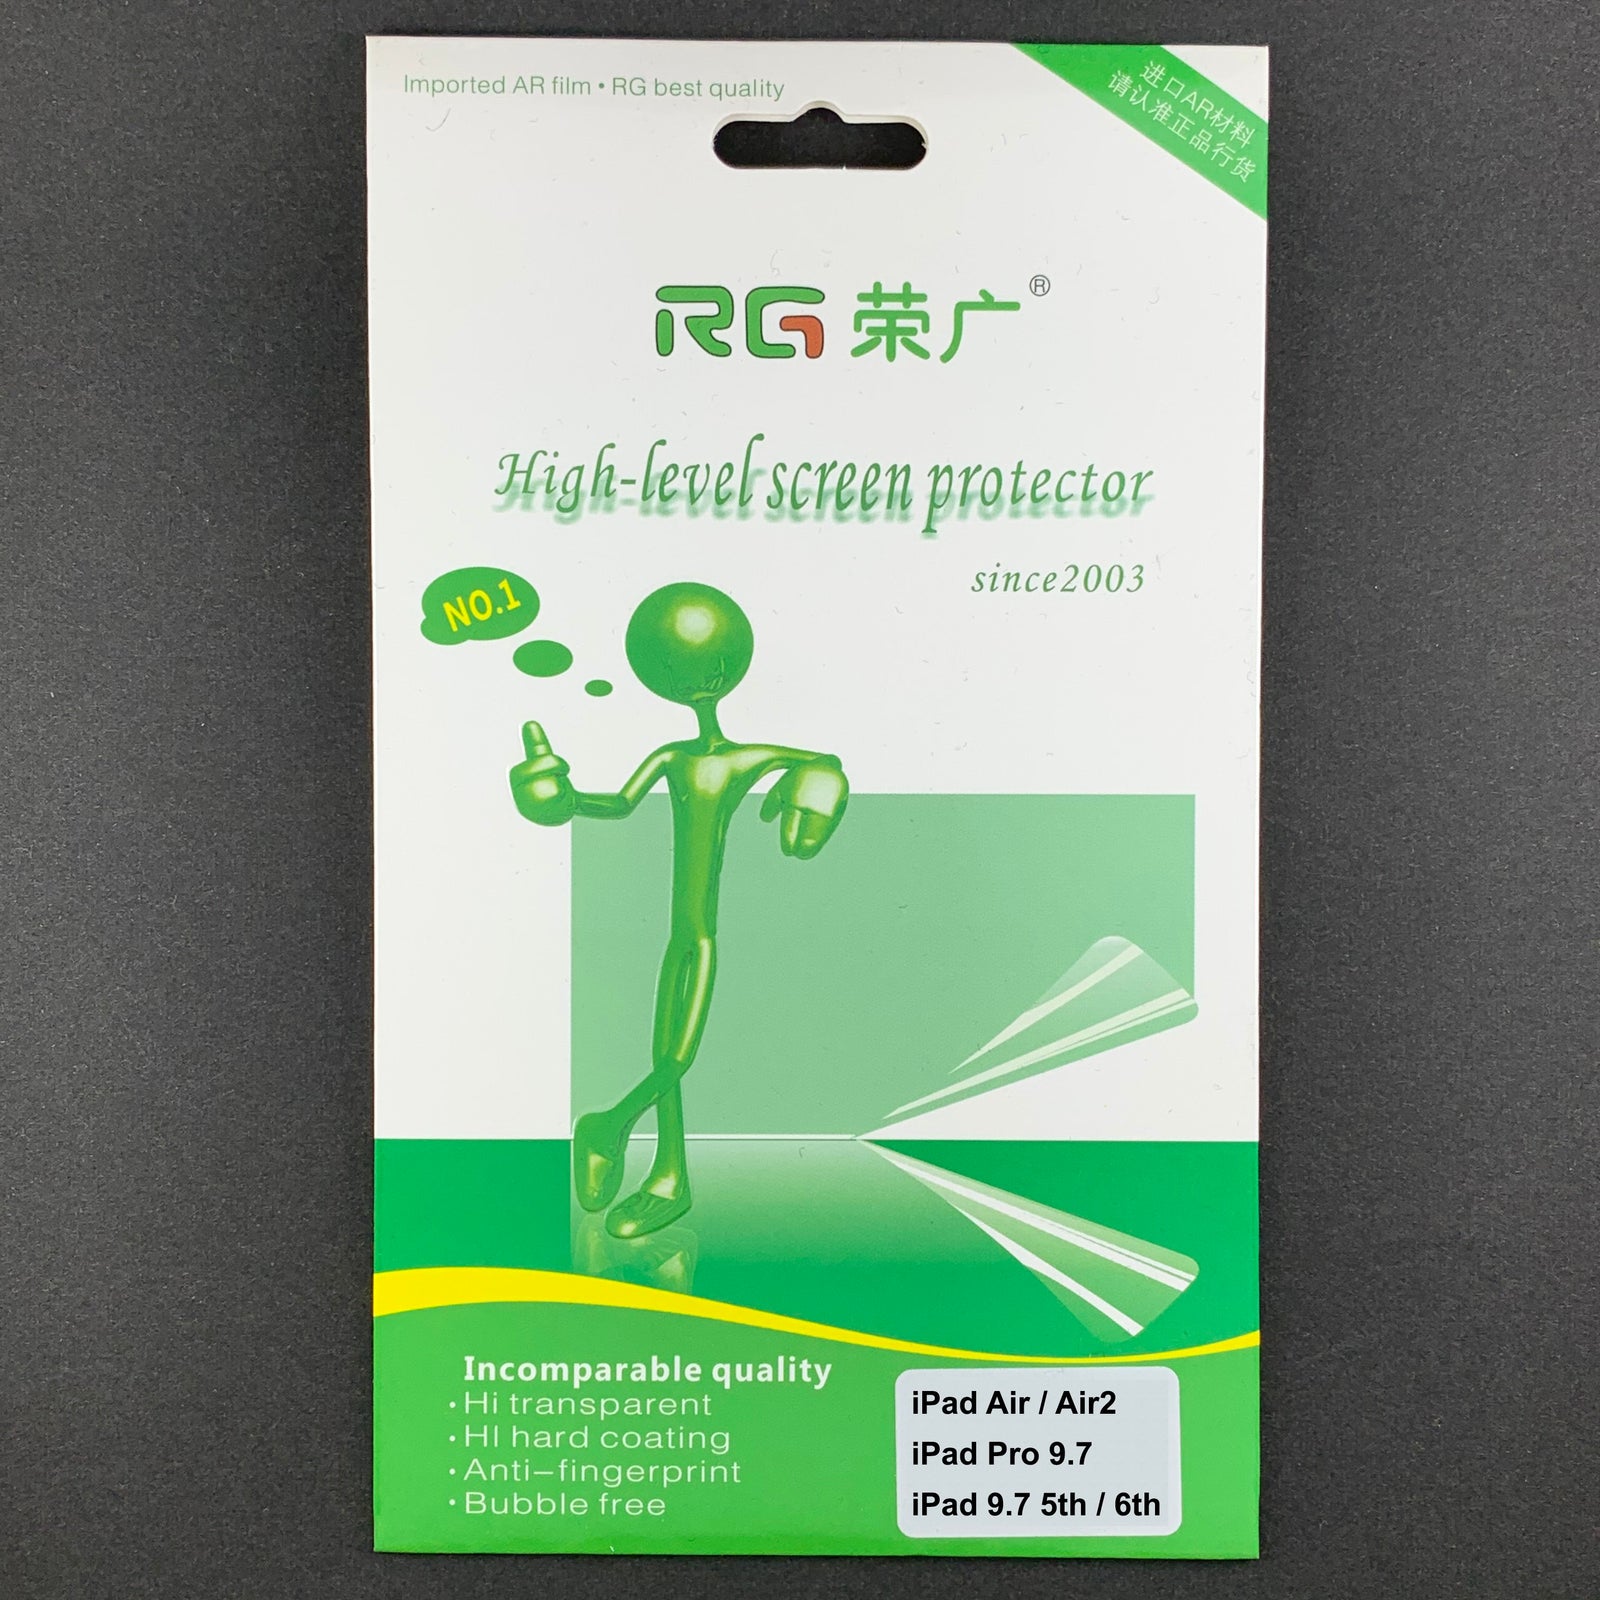 RG Professional Soft Film Screen Protector for iPad Air / Air 2 / Pro 9.7 5th / 6th (MATTE, 2-PACK)